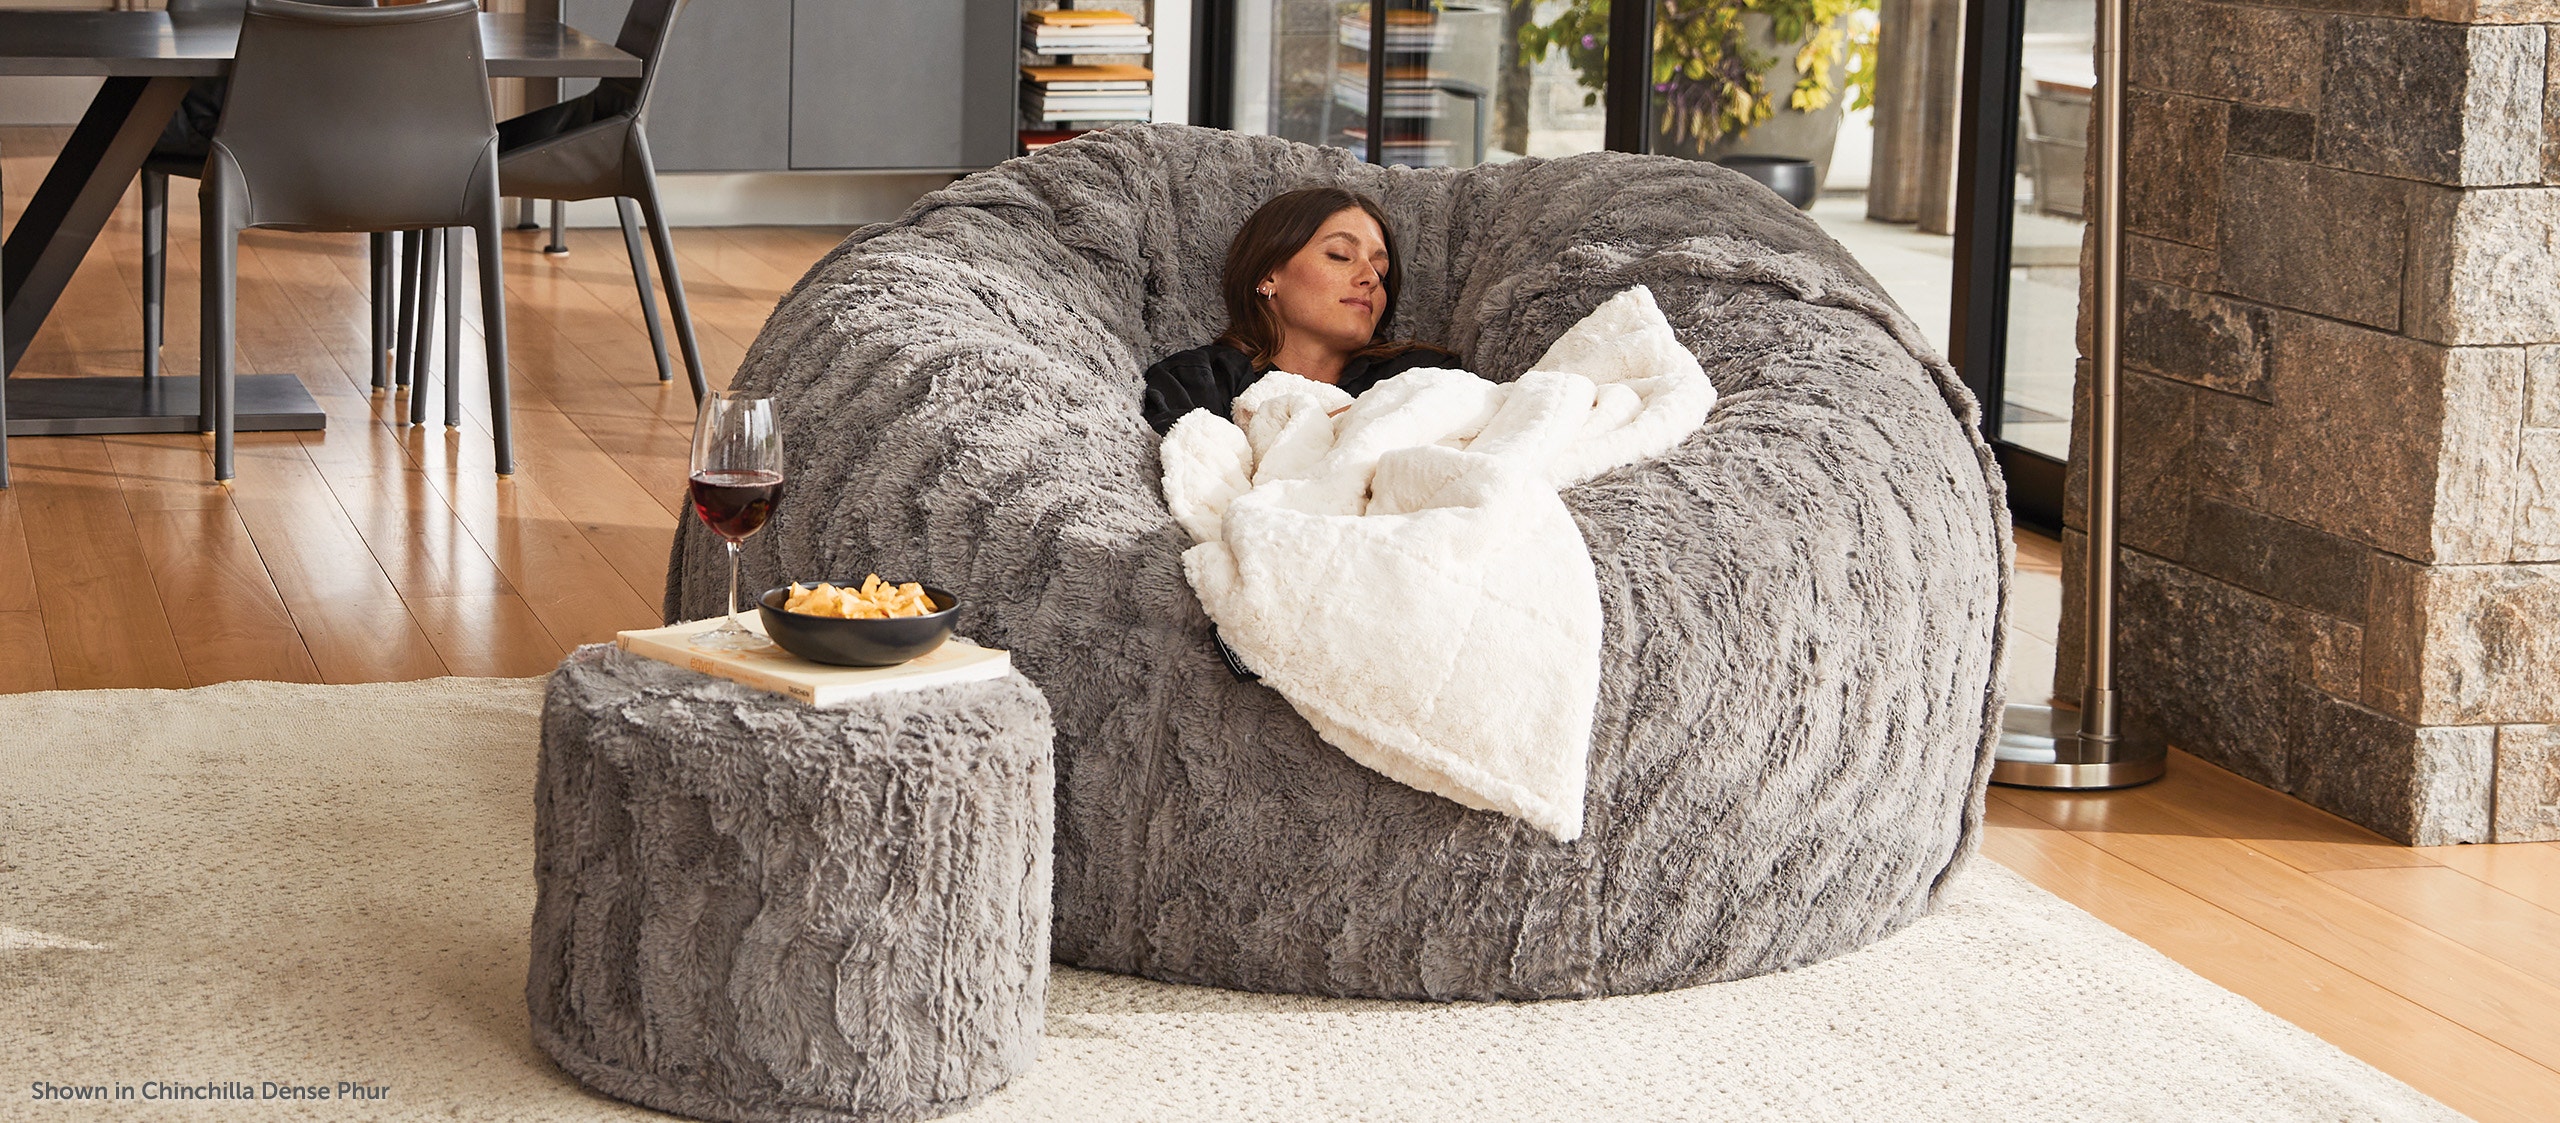 Couple enjoying Harman Kardon surround sound in their Lovesac Sectional couch.